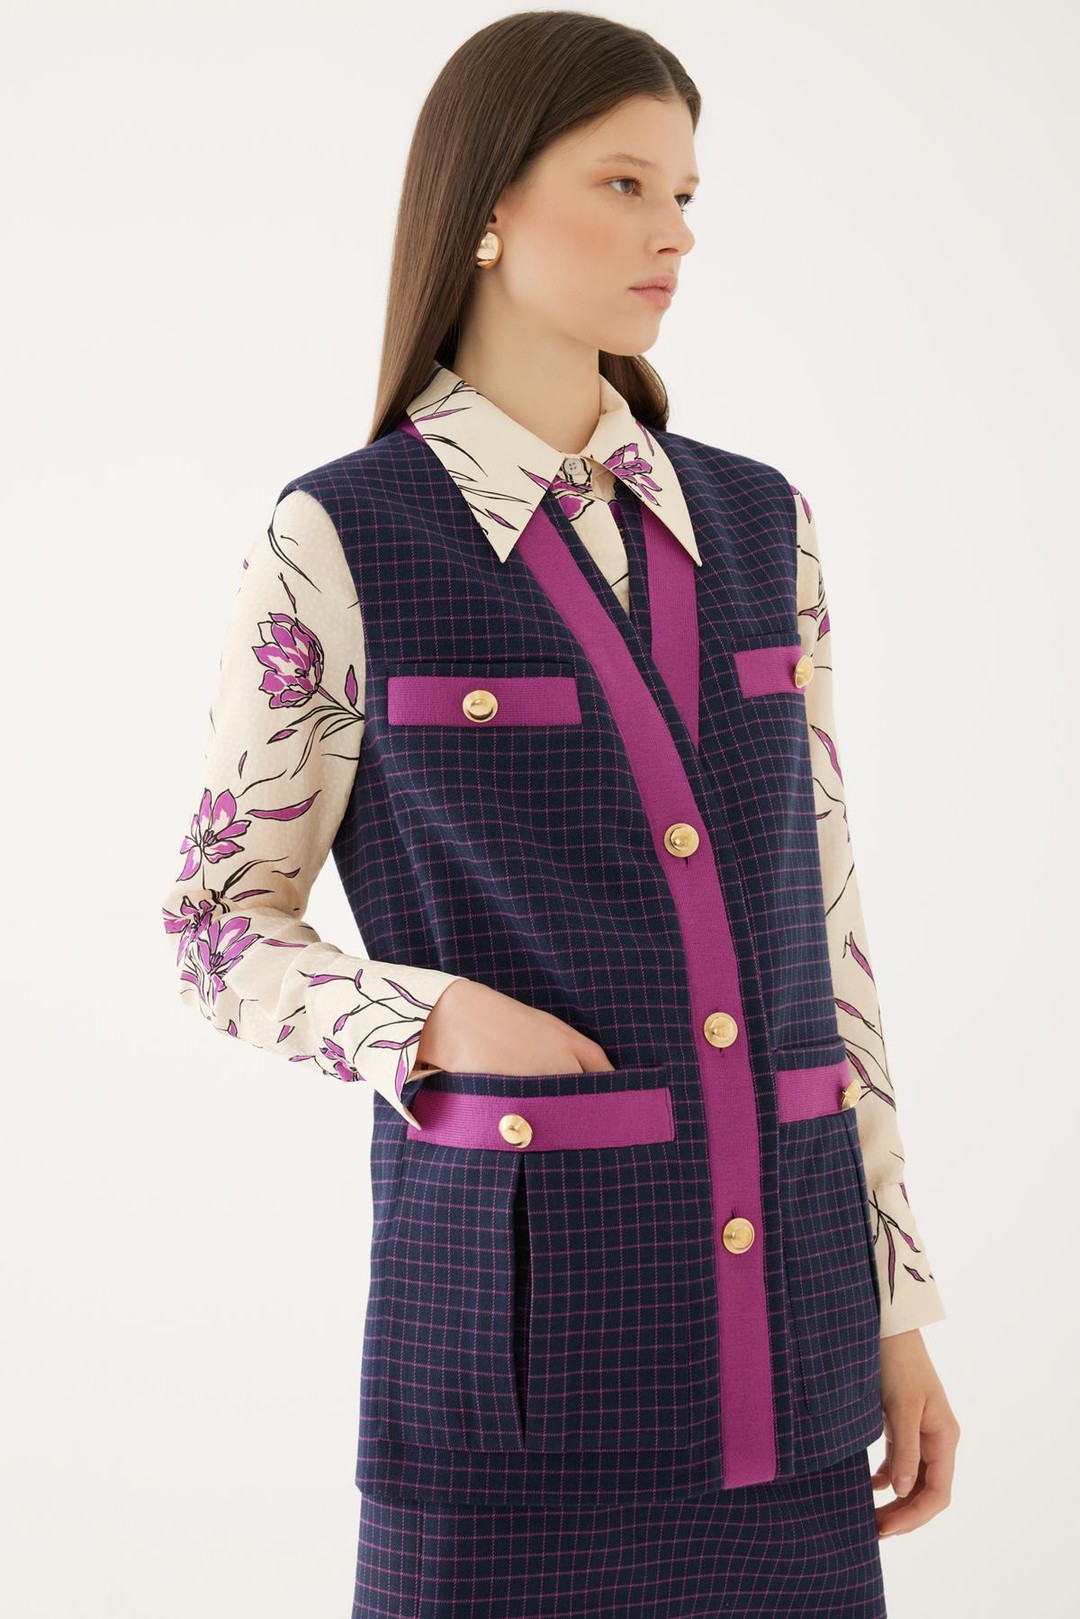 Colorful vest with button detail 1